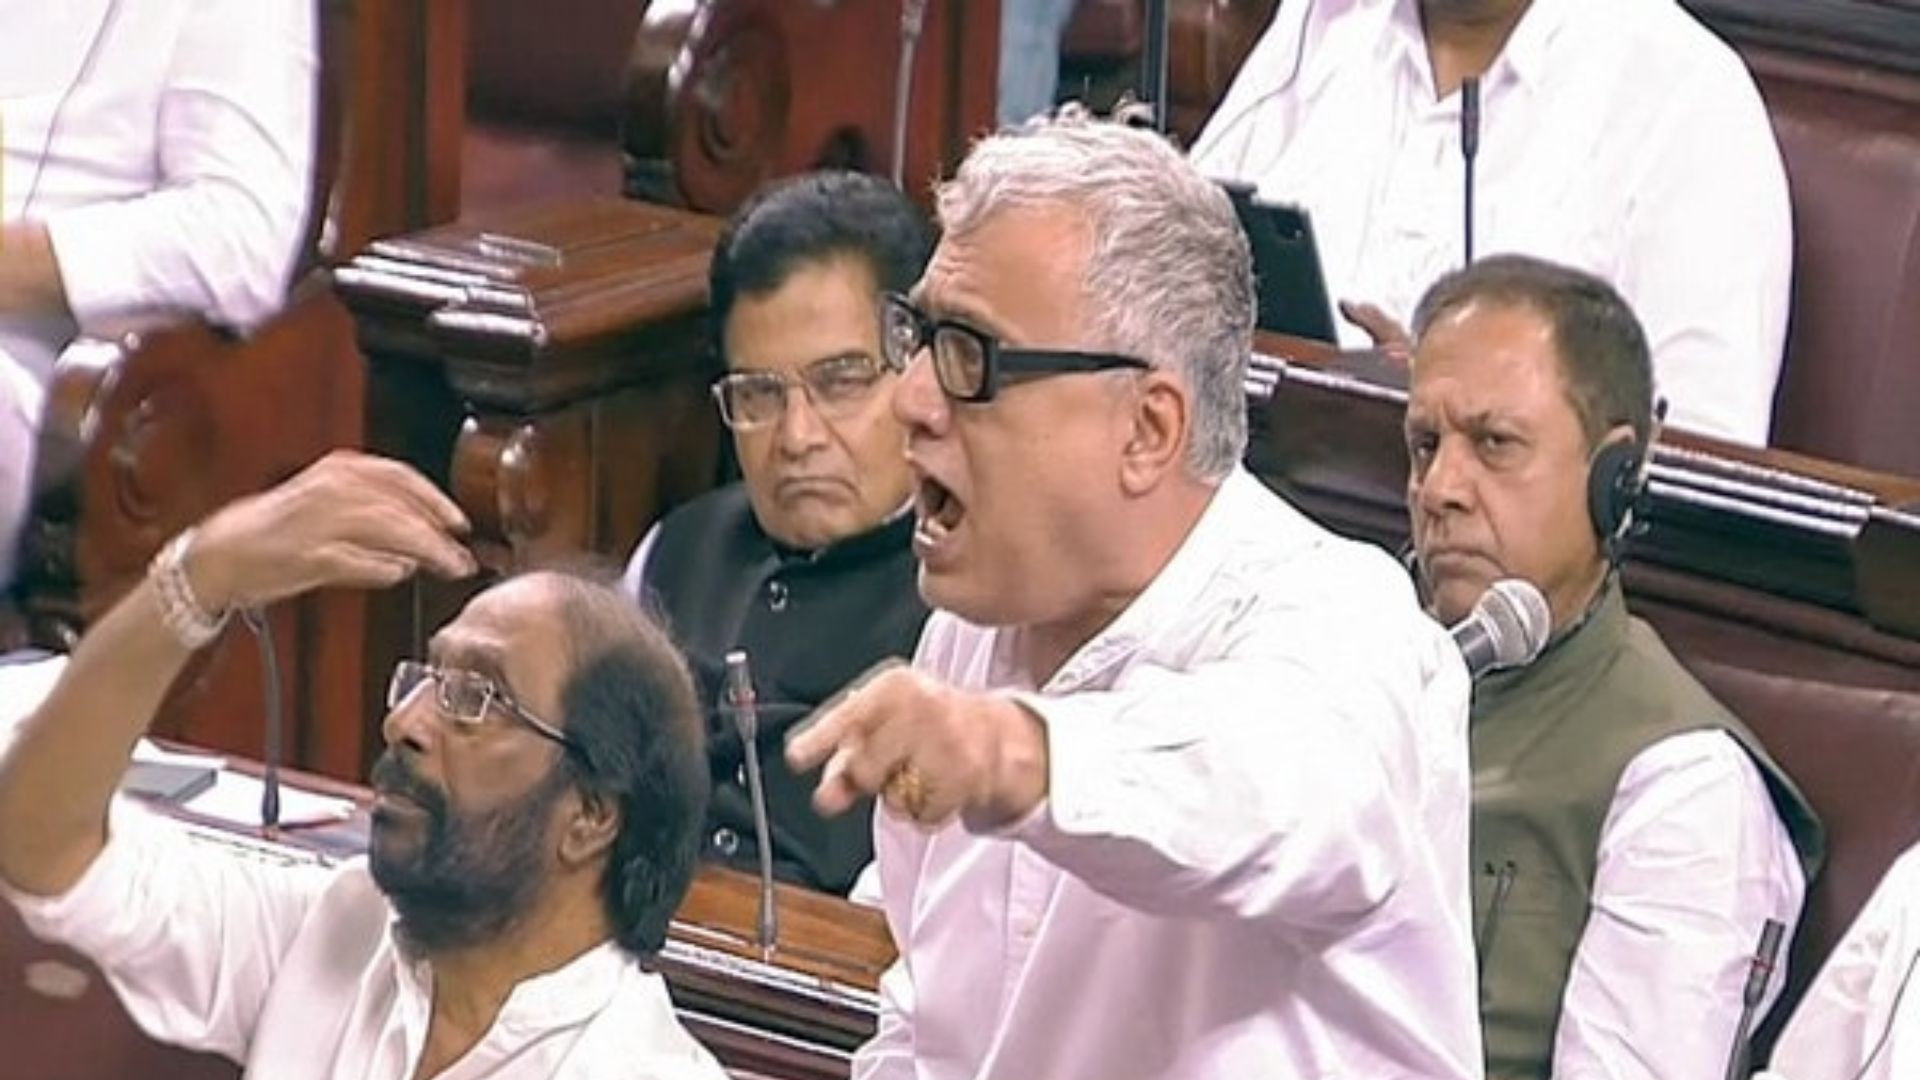 Parliament Winter Session: Trinamool member Derek O’Brien suspended for ‘gross misconduct’